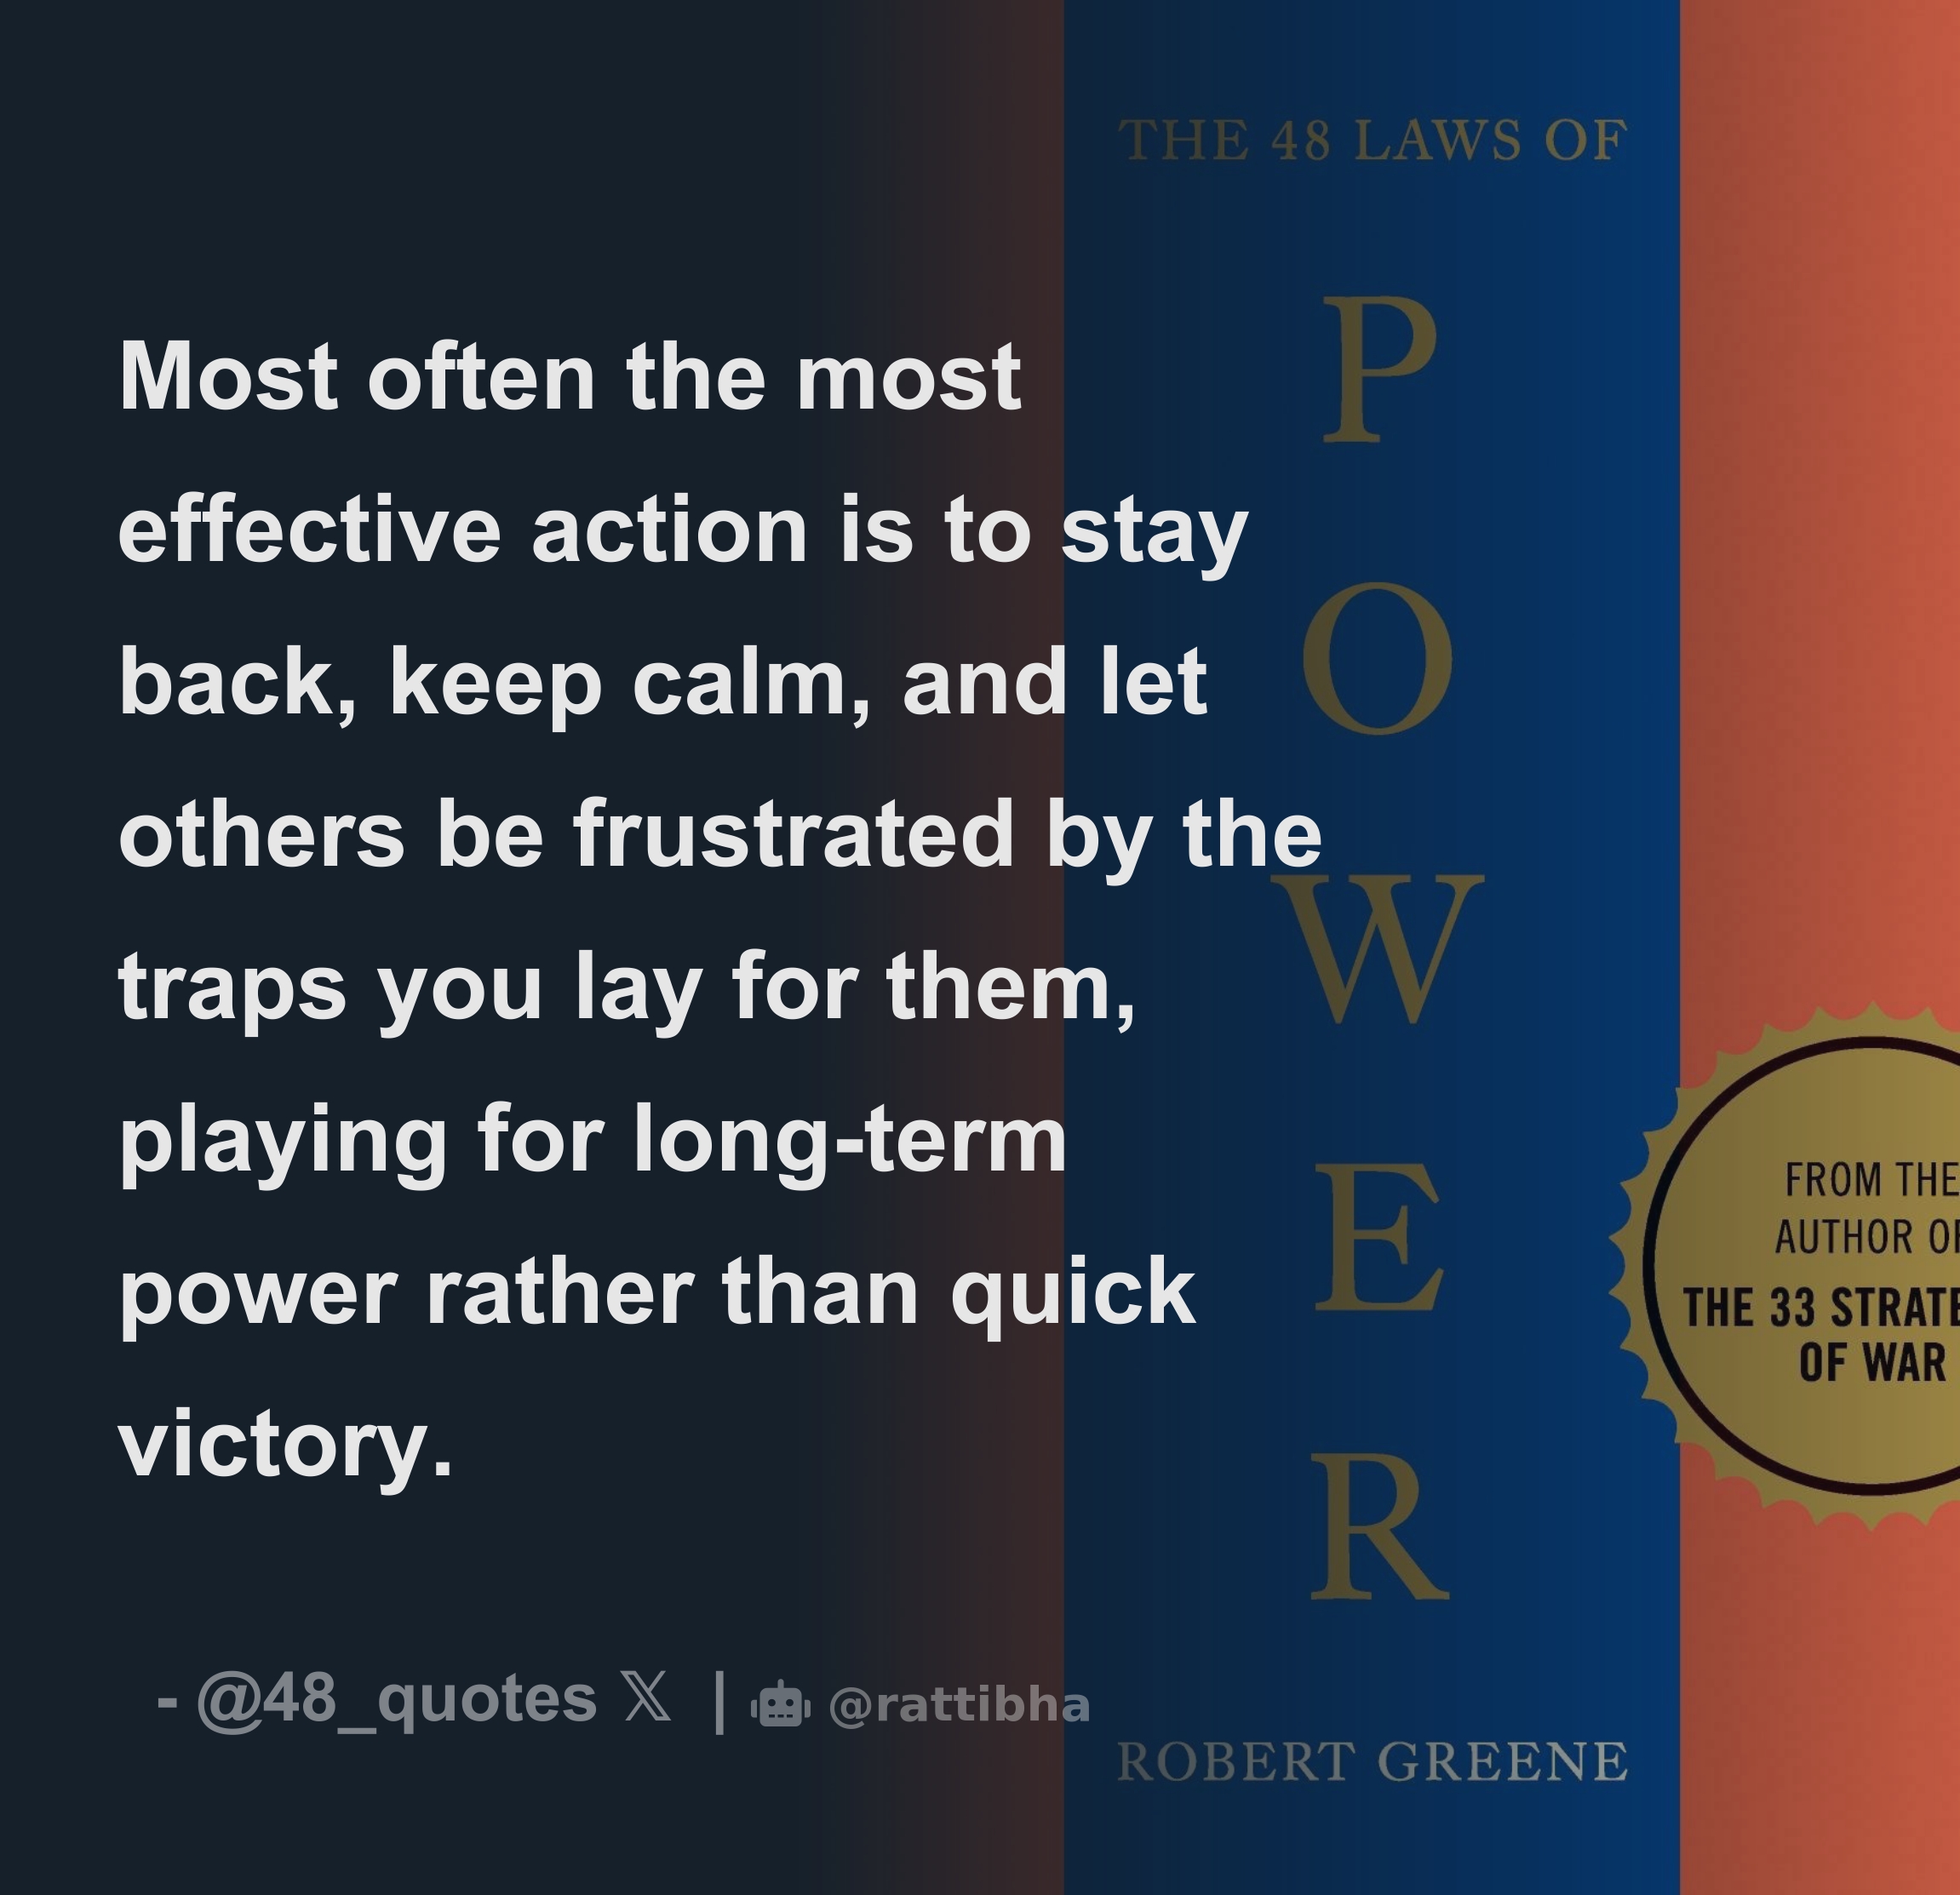 Most often the most effective action is to stay back, keep calm, and let  others be frustrated by the traps you lay for them, playing for long-term  pow - Thread from 48